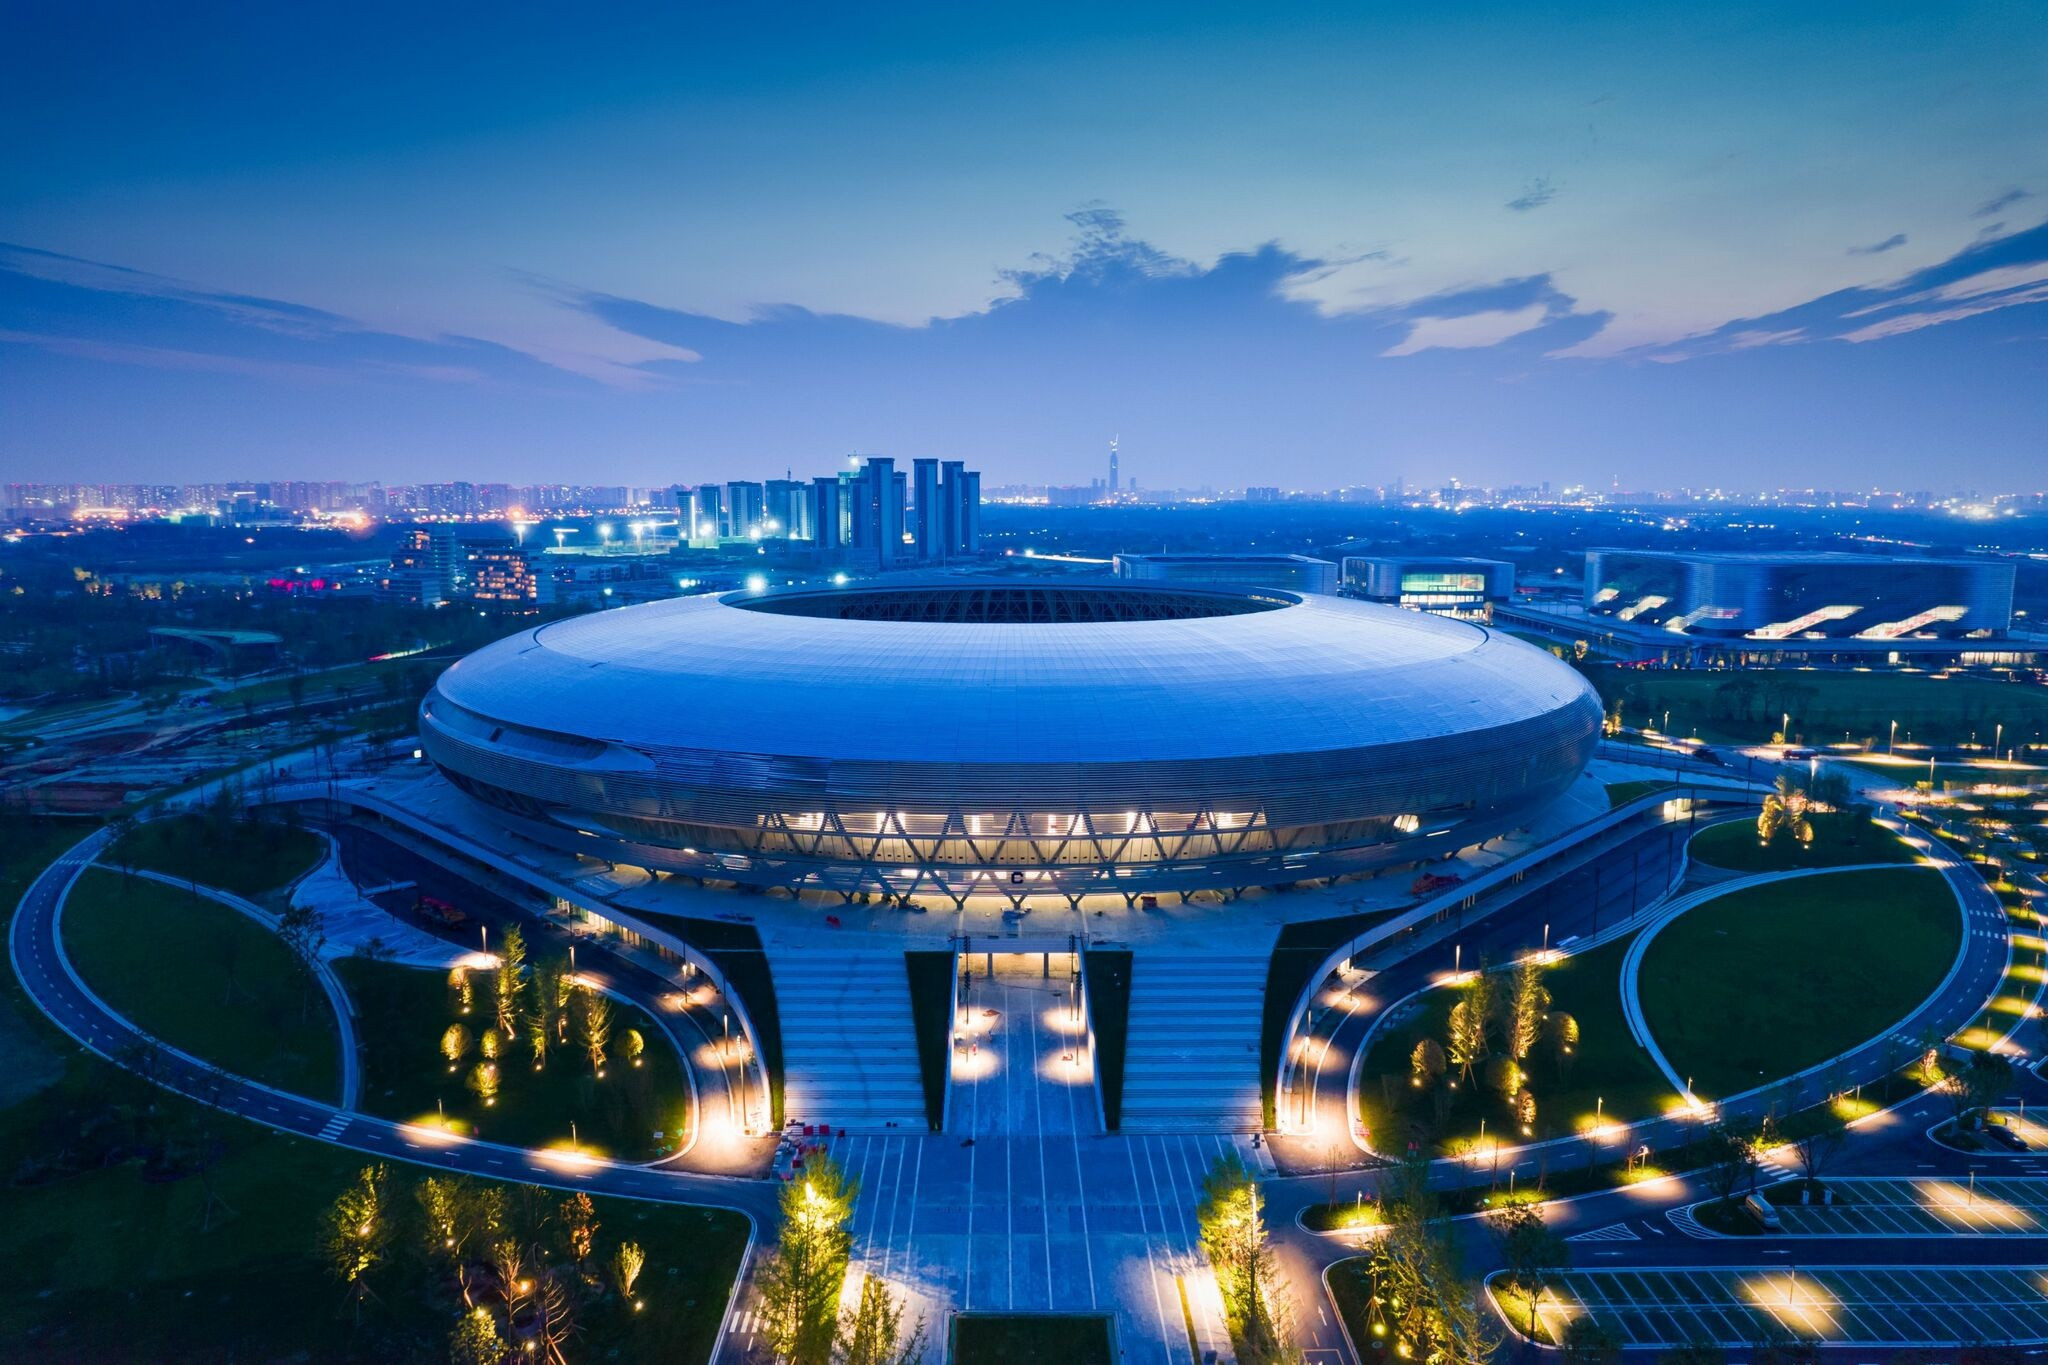 The Dong'an Lake Sports Park is set to be the venue for the Chengdu 2021 Opening Ceremony ©Chengdu 2021